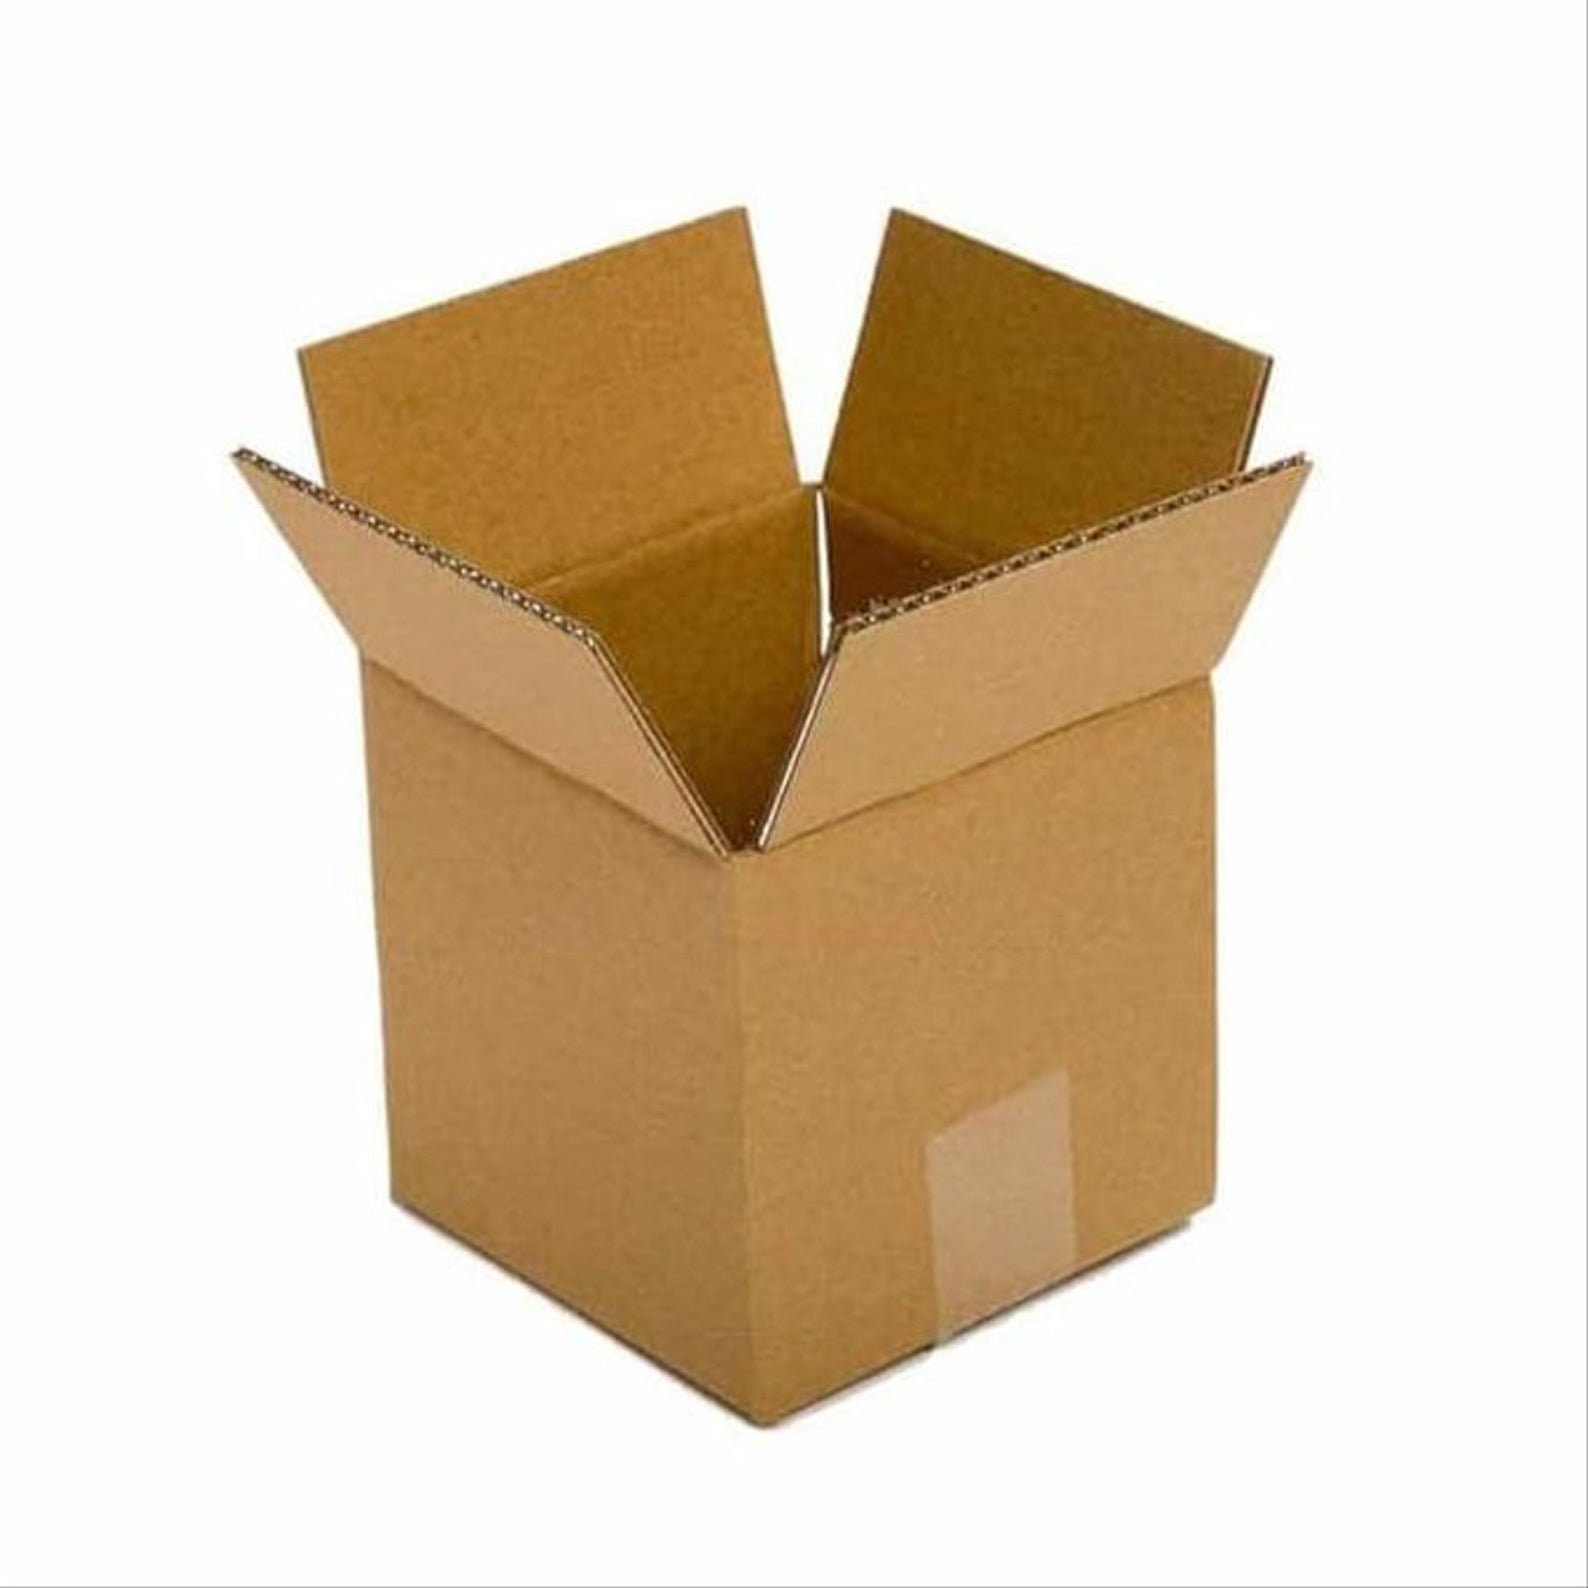 50 4x4x4 Packing Shipping Cartons Corrugated Boxes Material Handling